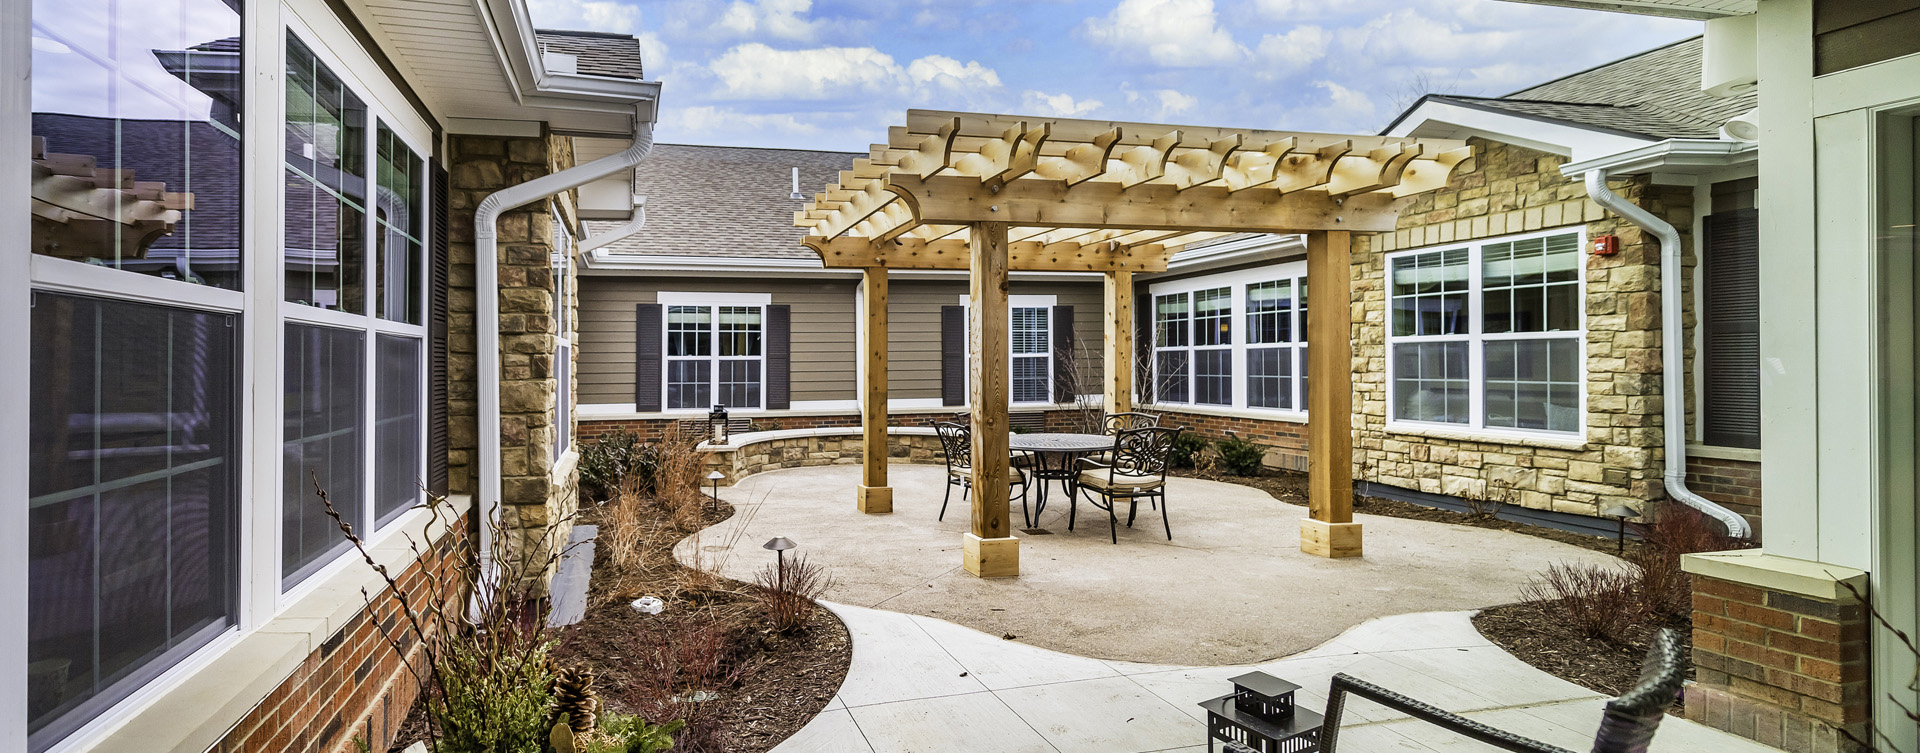 Residents with dementia can enjoy a traveling path, relaxed seating and raised garden beds in the courtyard at Bickford of Canton